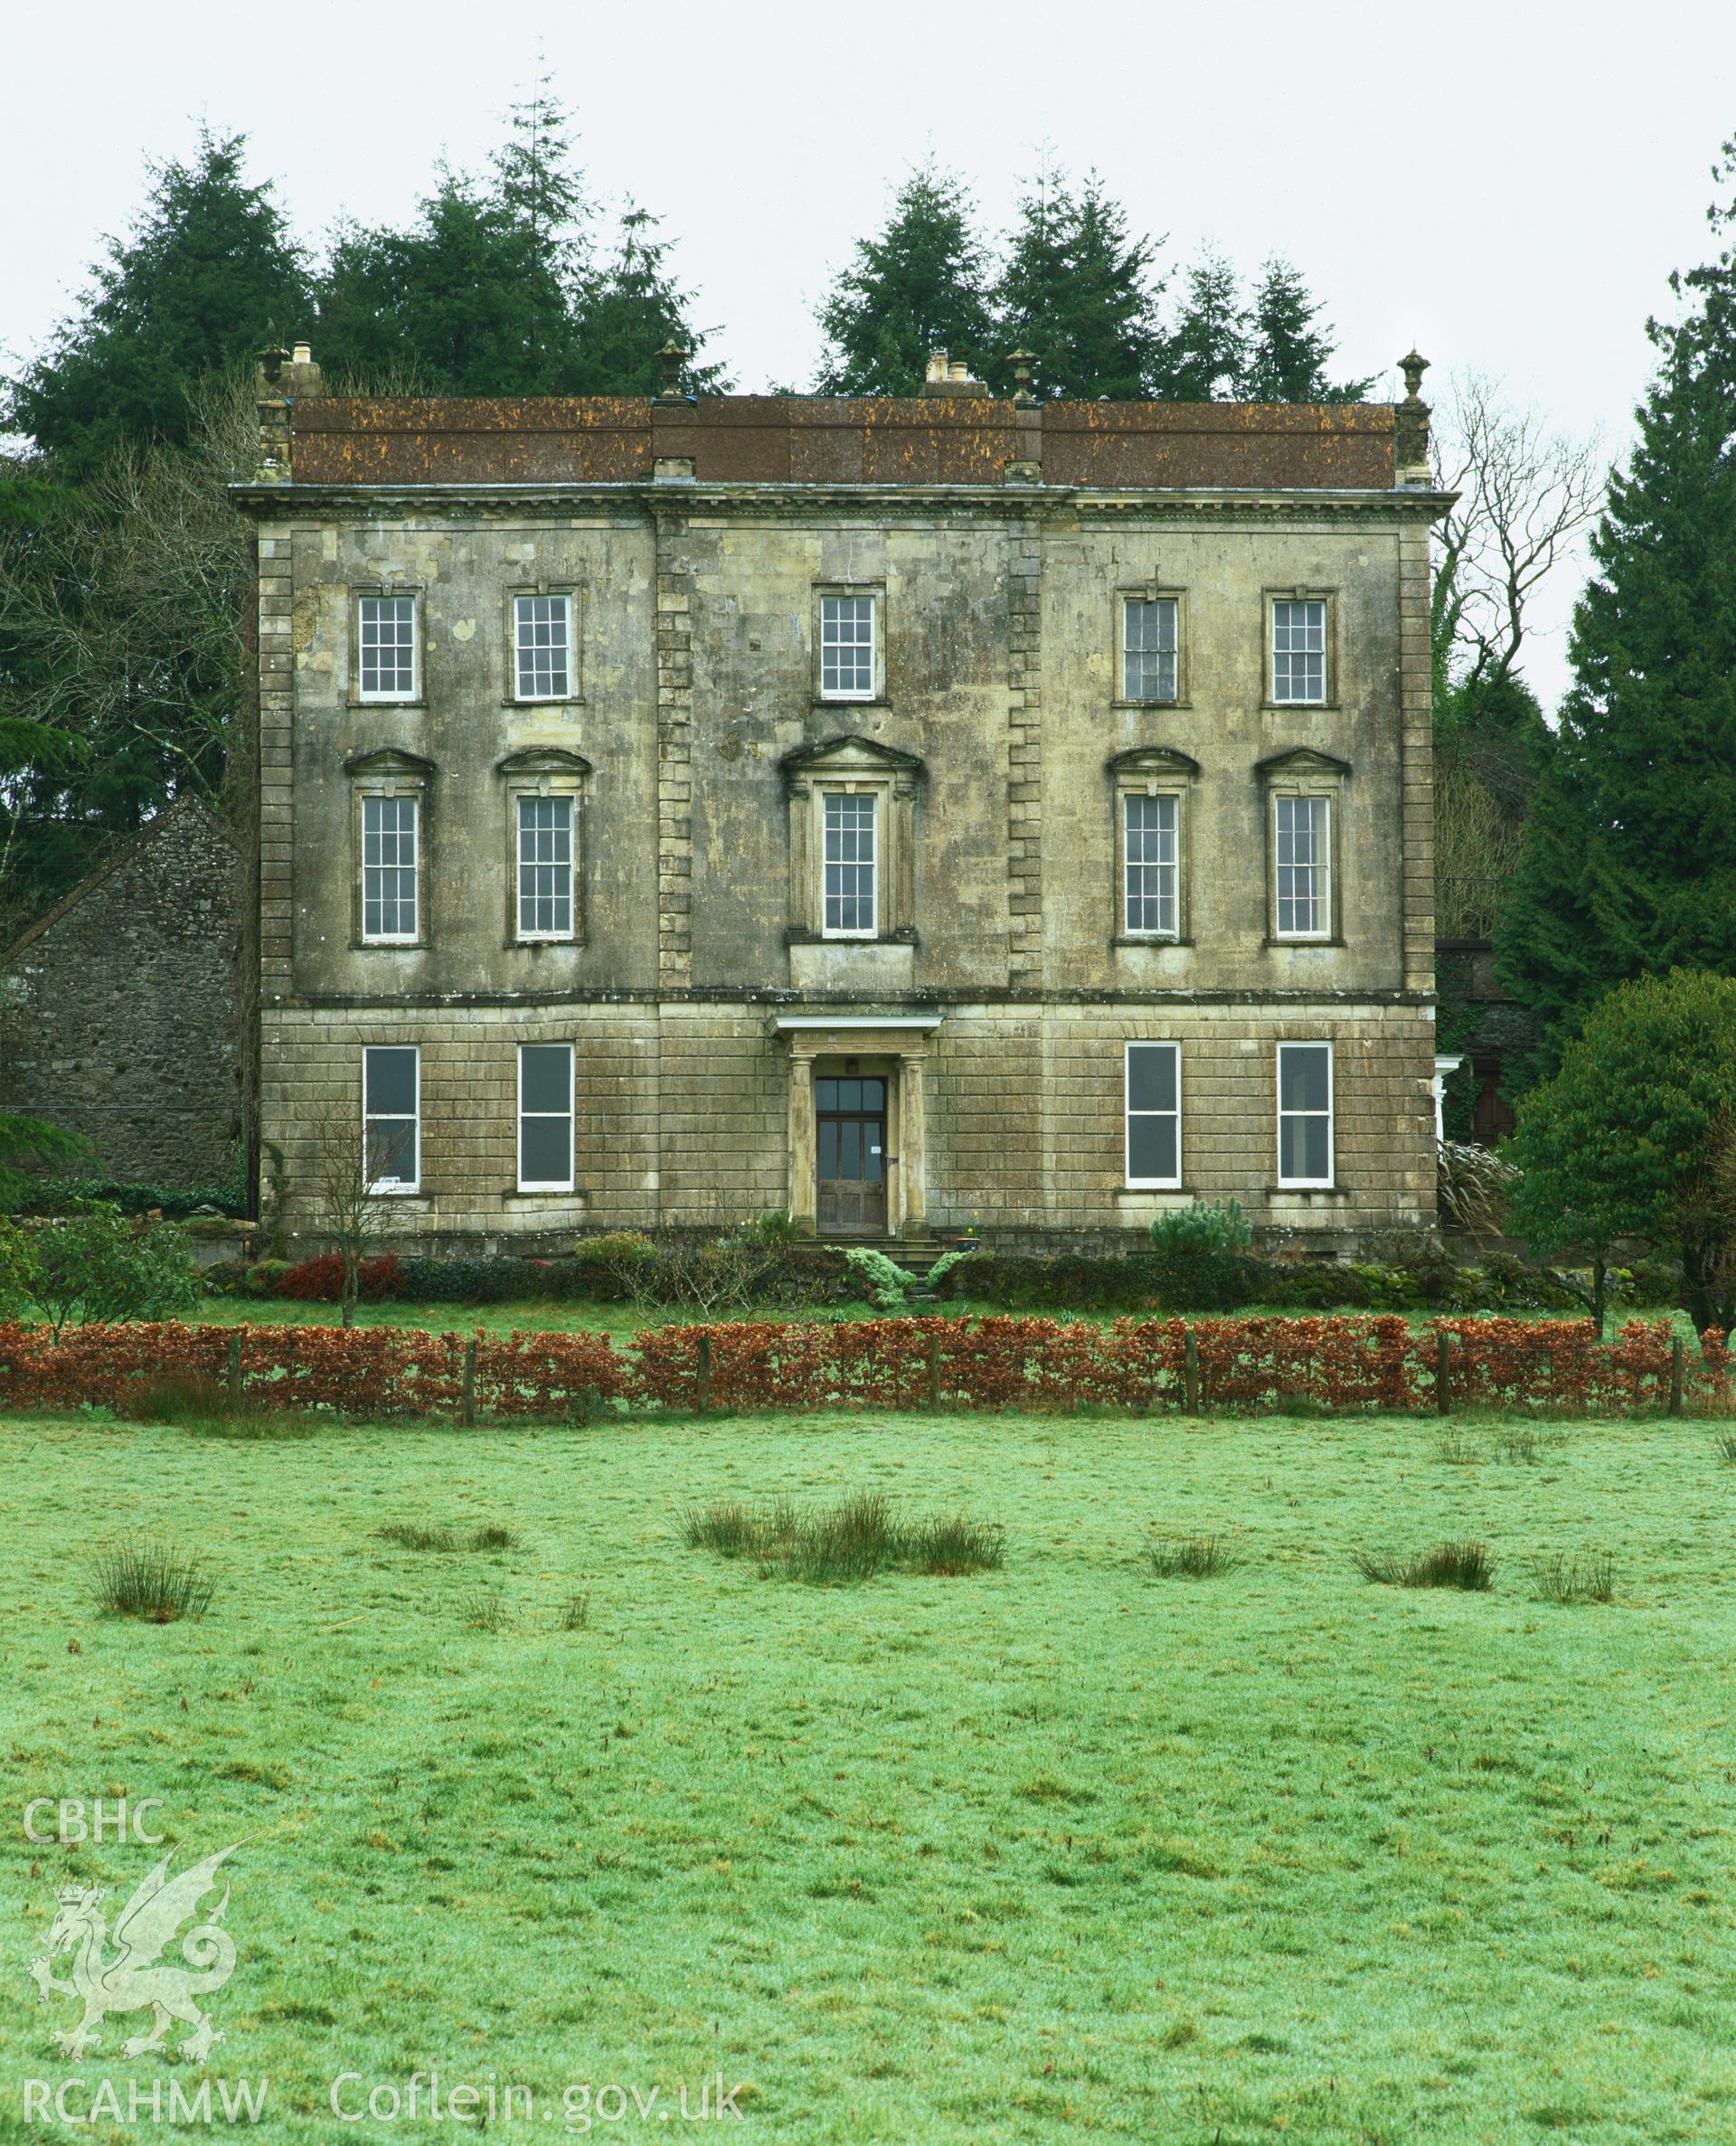 Colour transparency showing Taliaris, produced by Iain Wright, 2005